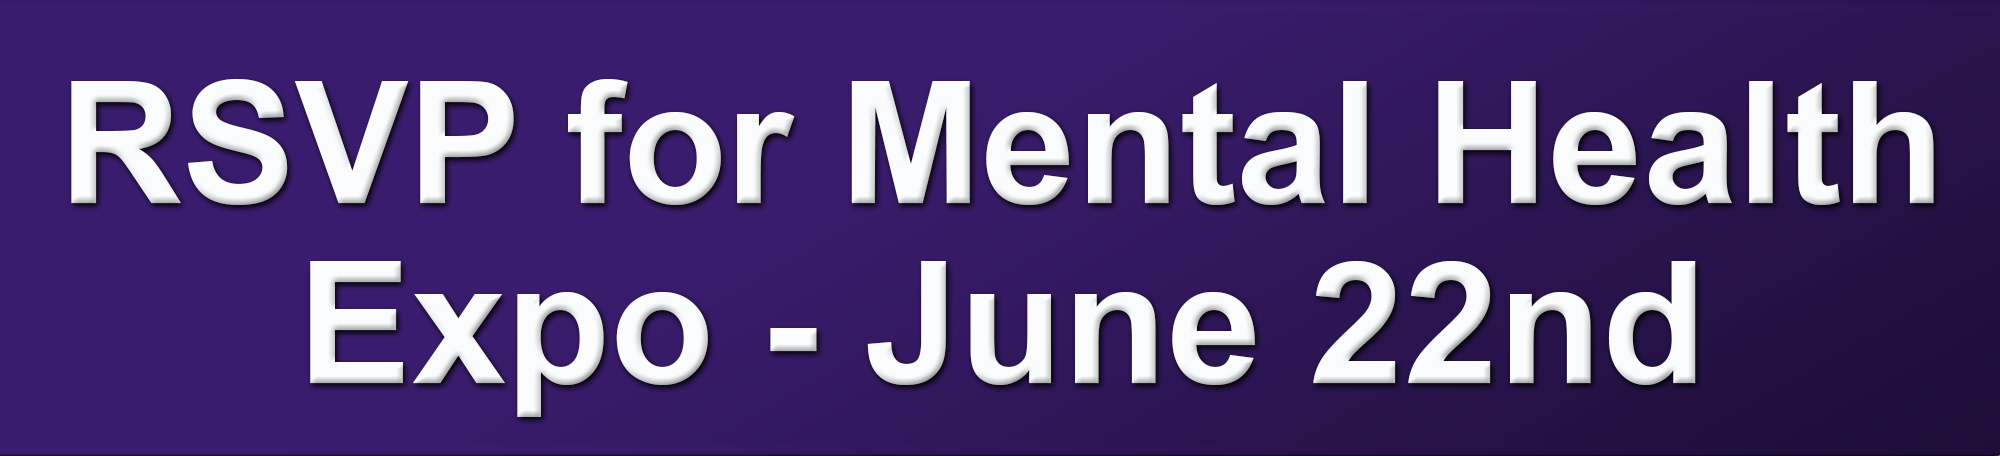 RSVP for Mental Health Expo - June 22nd